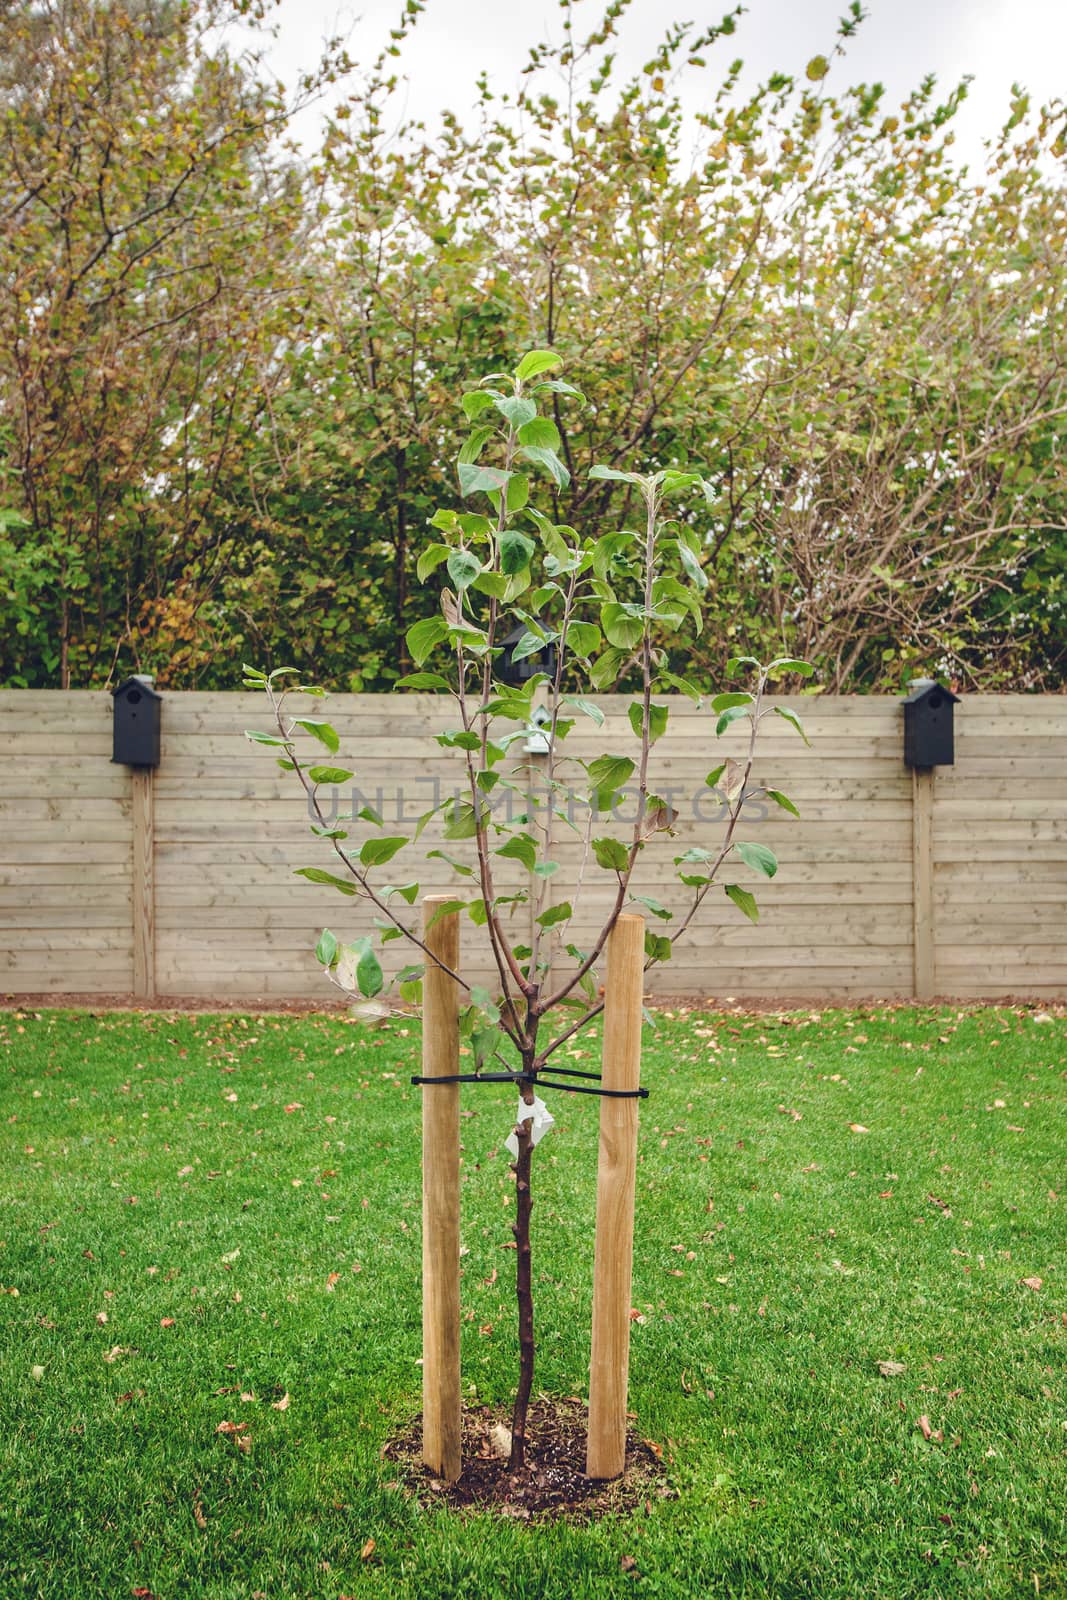 New planted apple tree in a garden in the fall